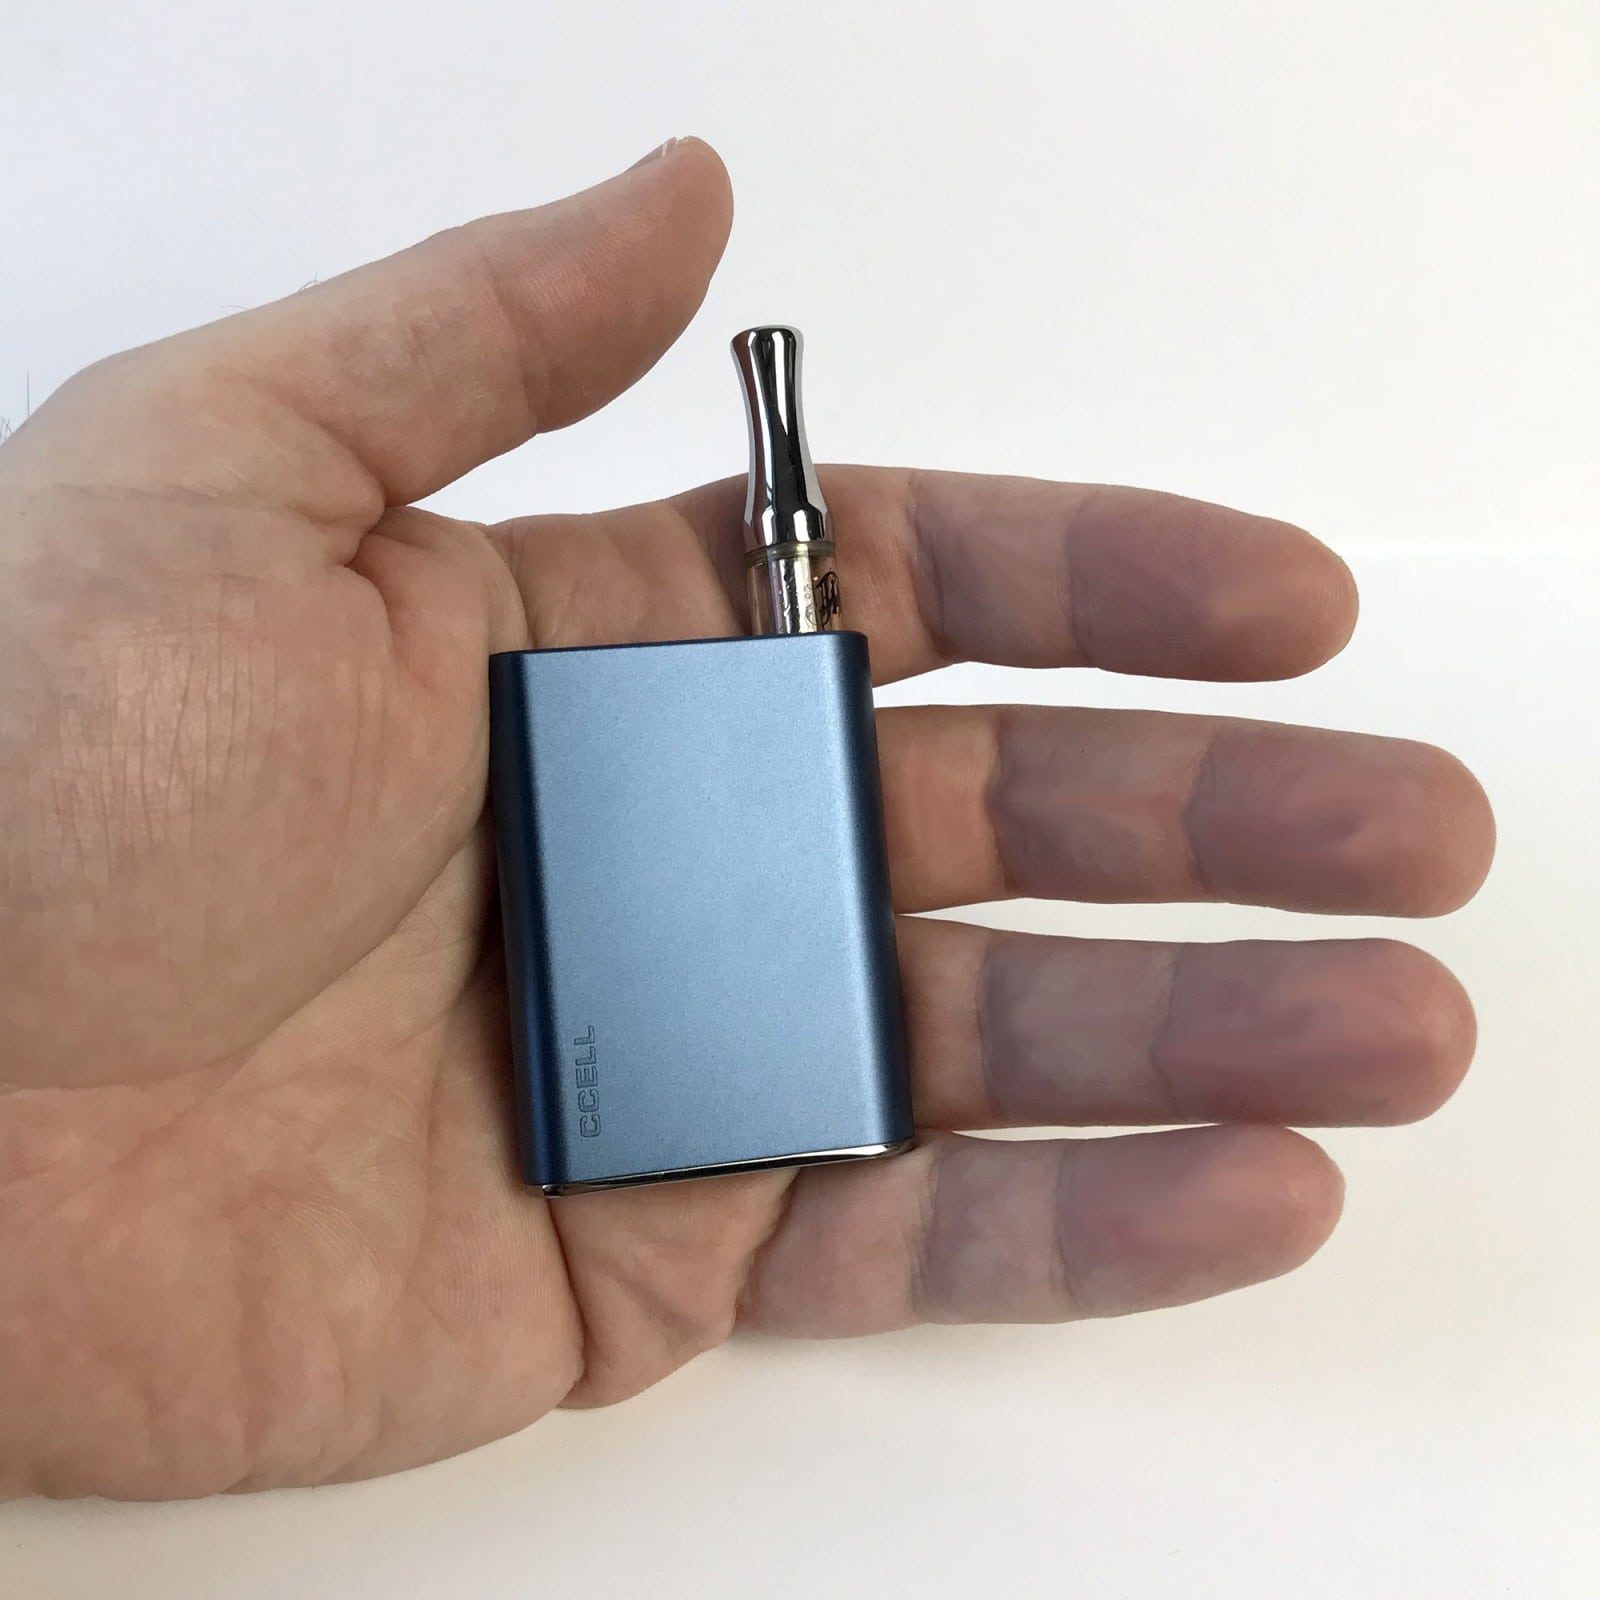 Ccell palm review